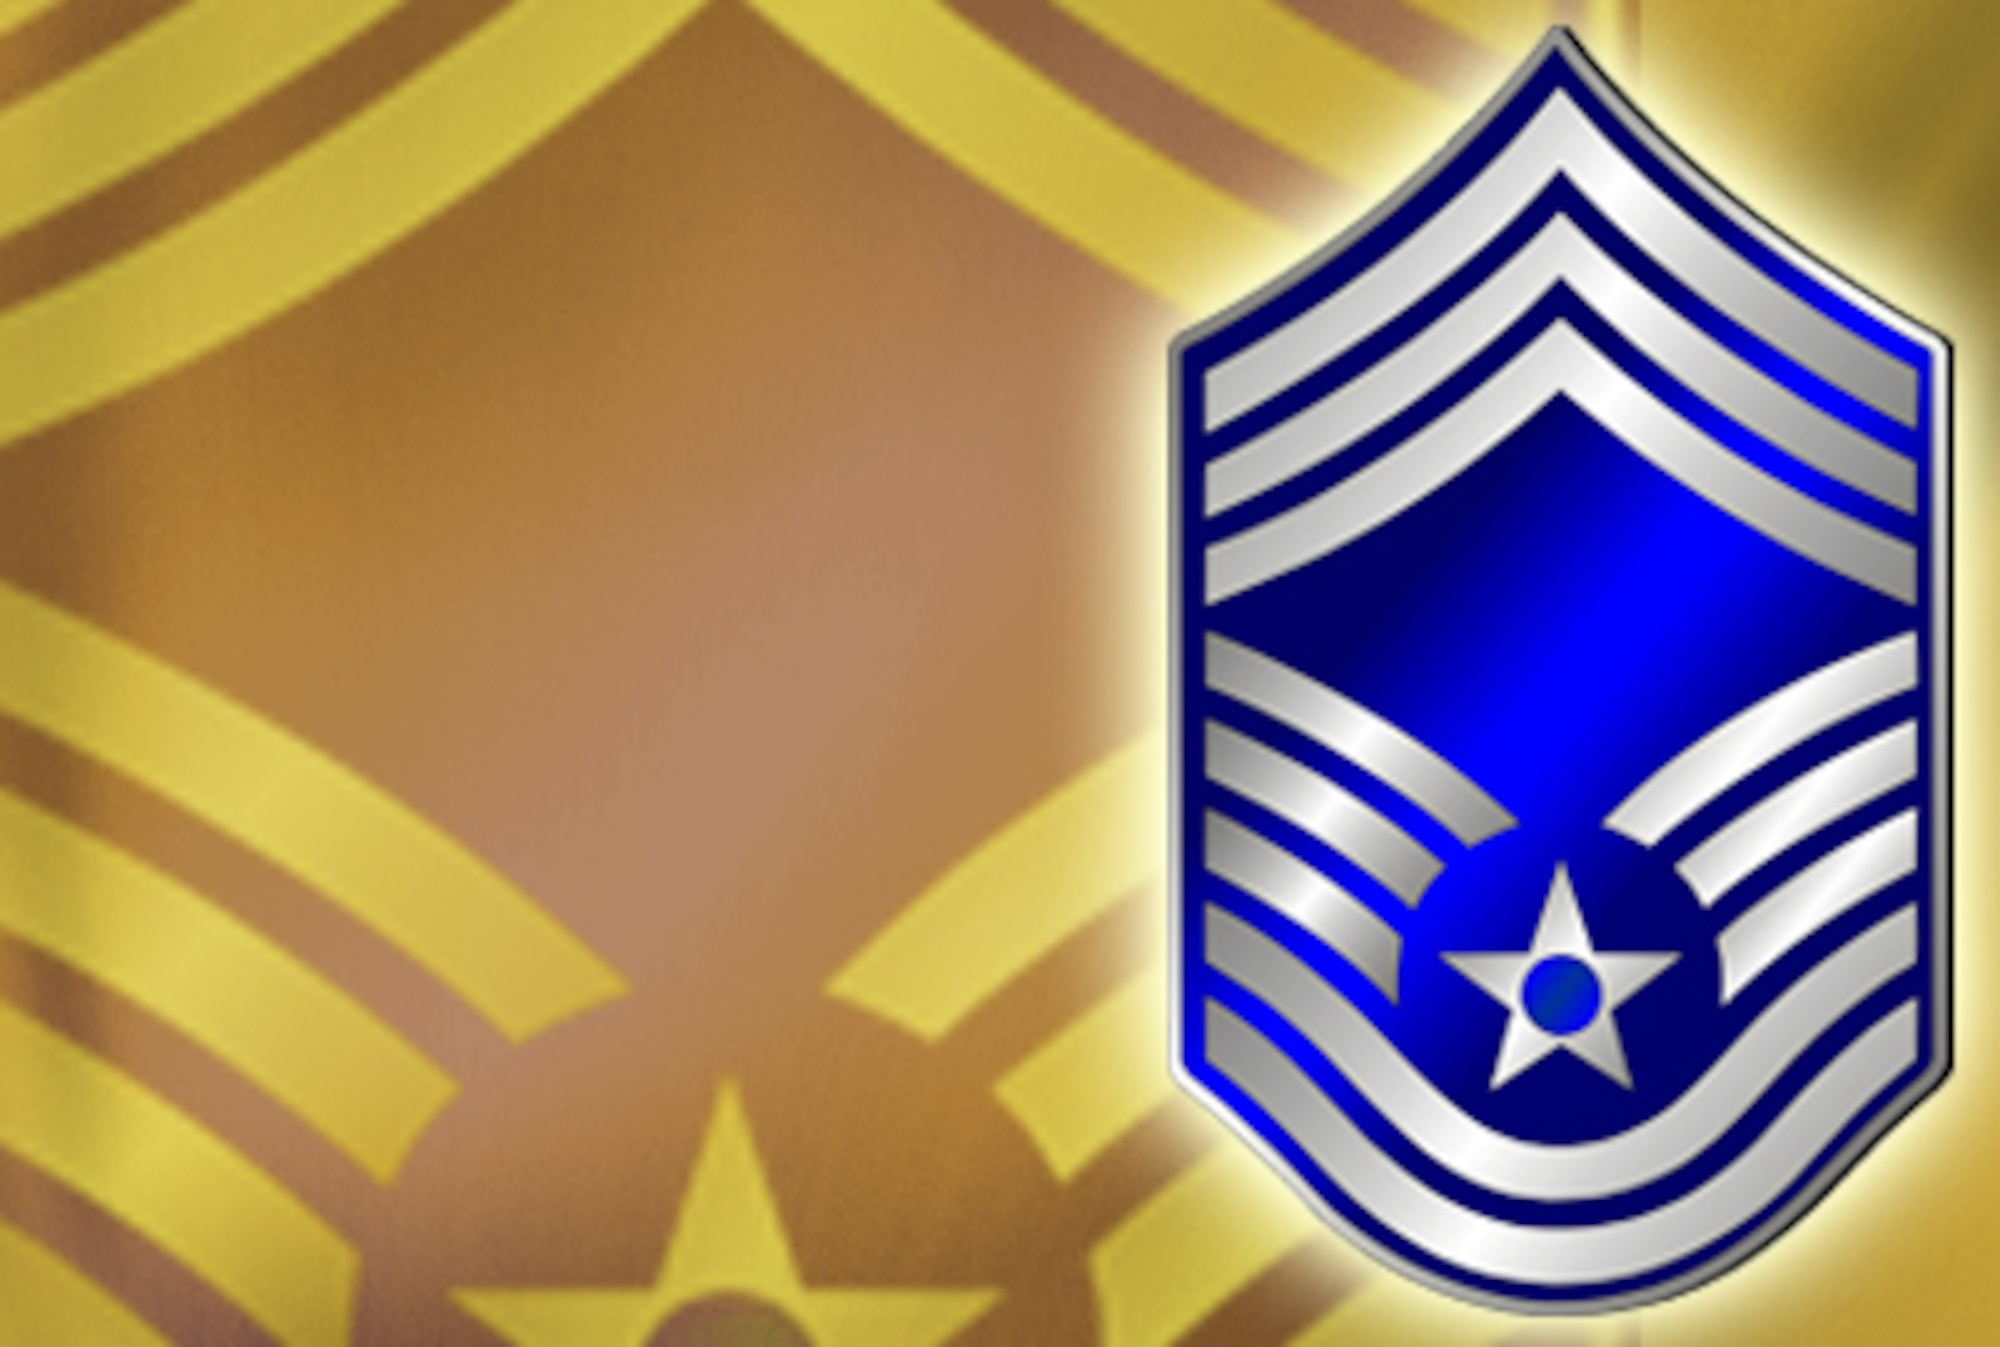 Chief master sgt. rank (E-9) turns 50 on Dec.1, 2009  (U.S. Air Force graphic)